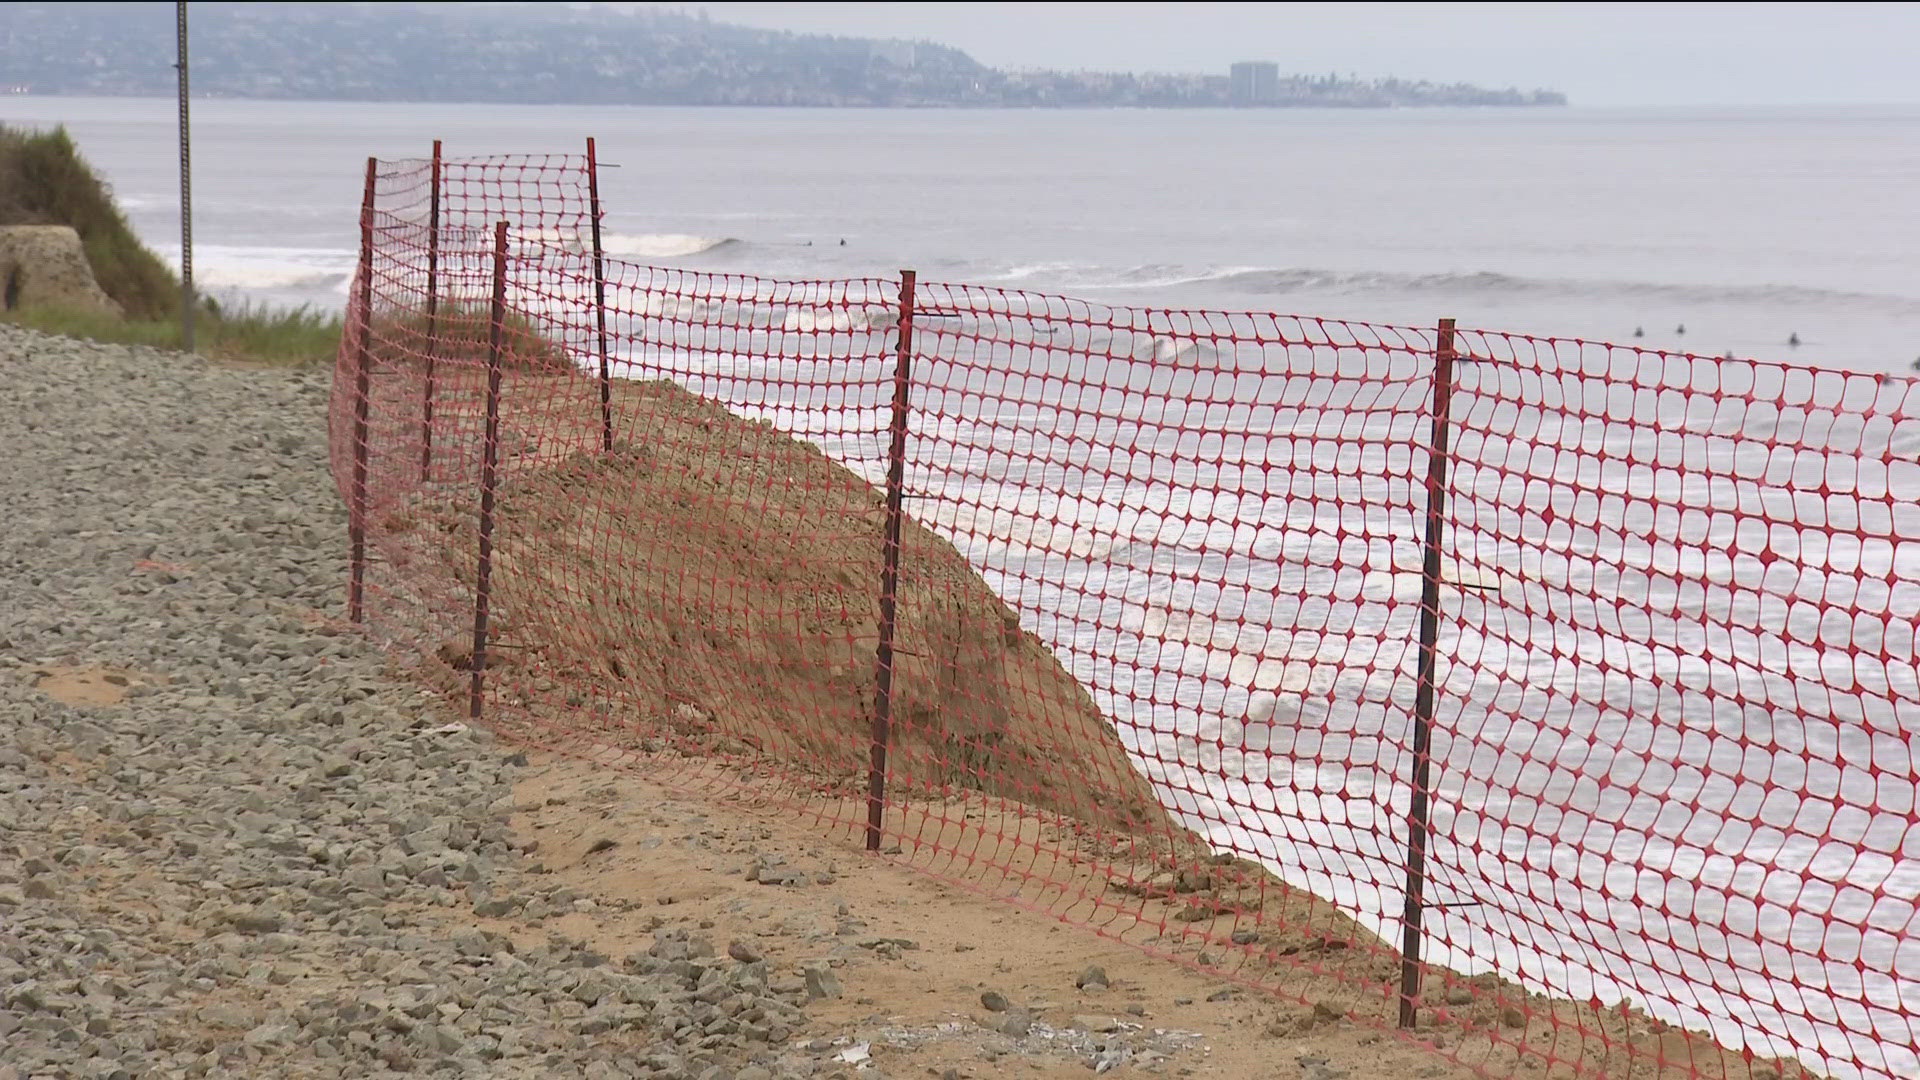 The alternative routes would move nearly 2 miles of tracks off the edge of the eroding seaside bluffs.